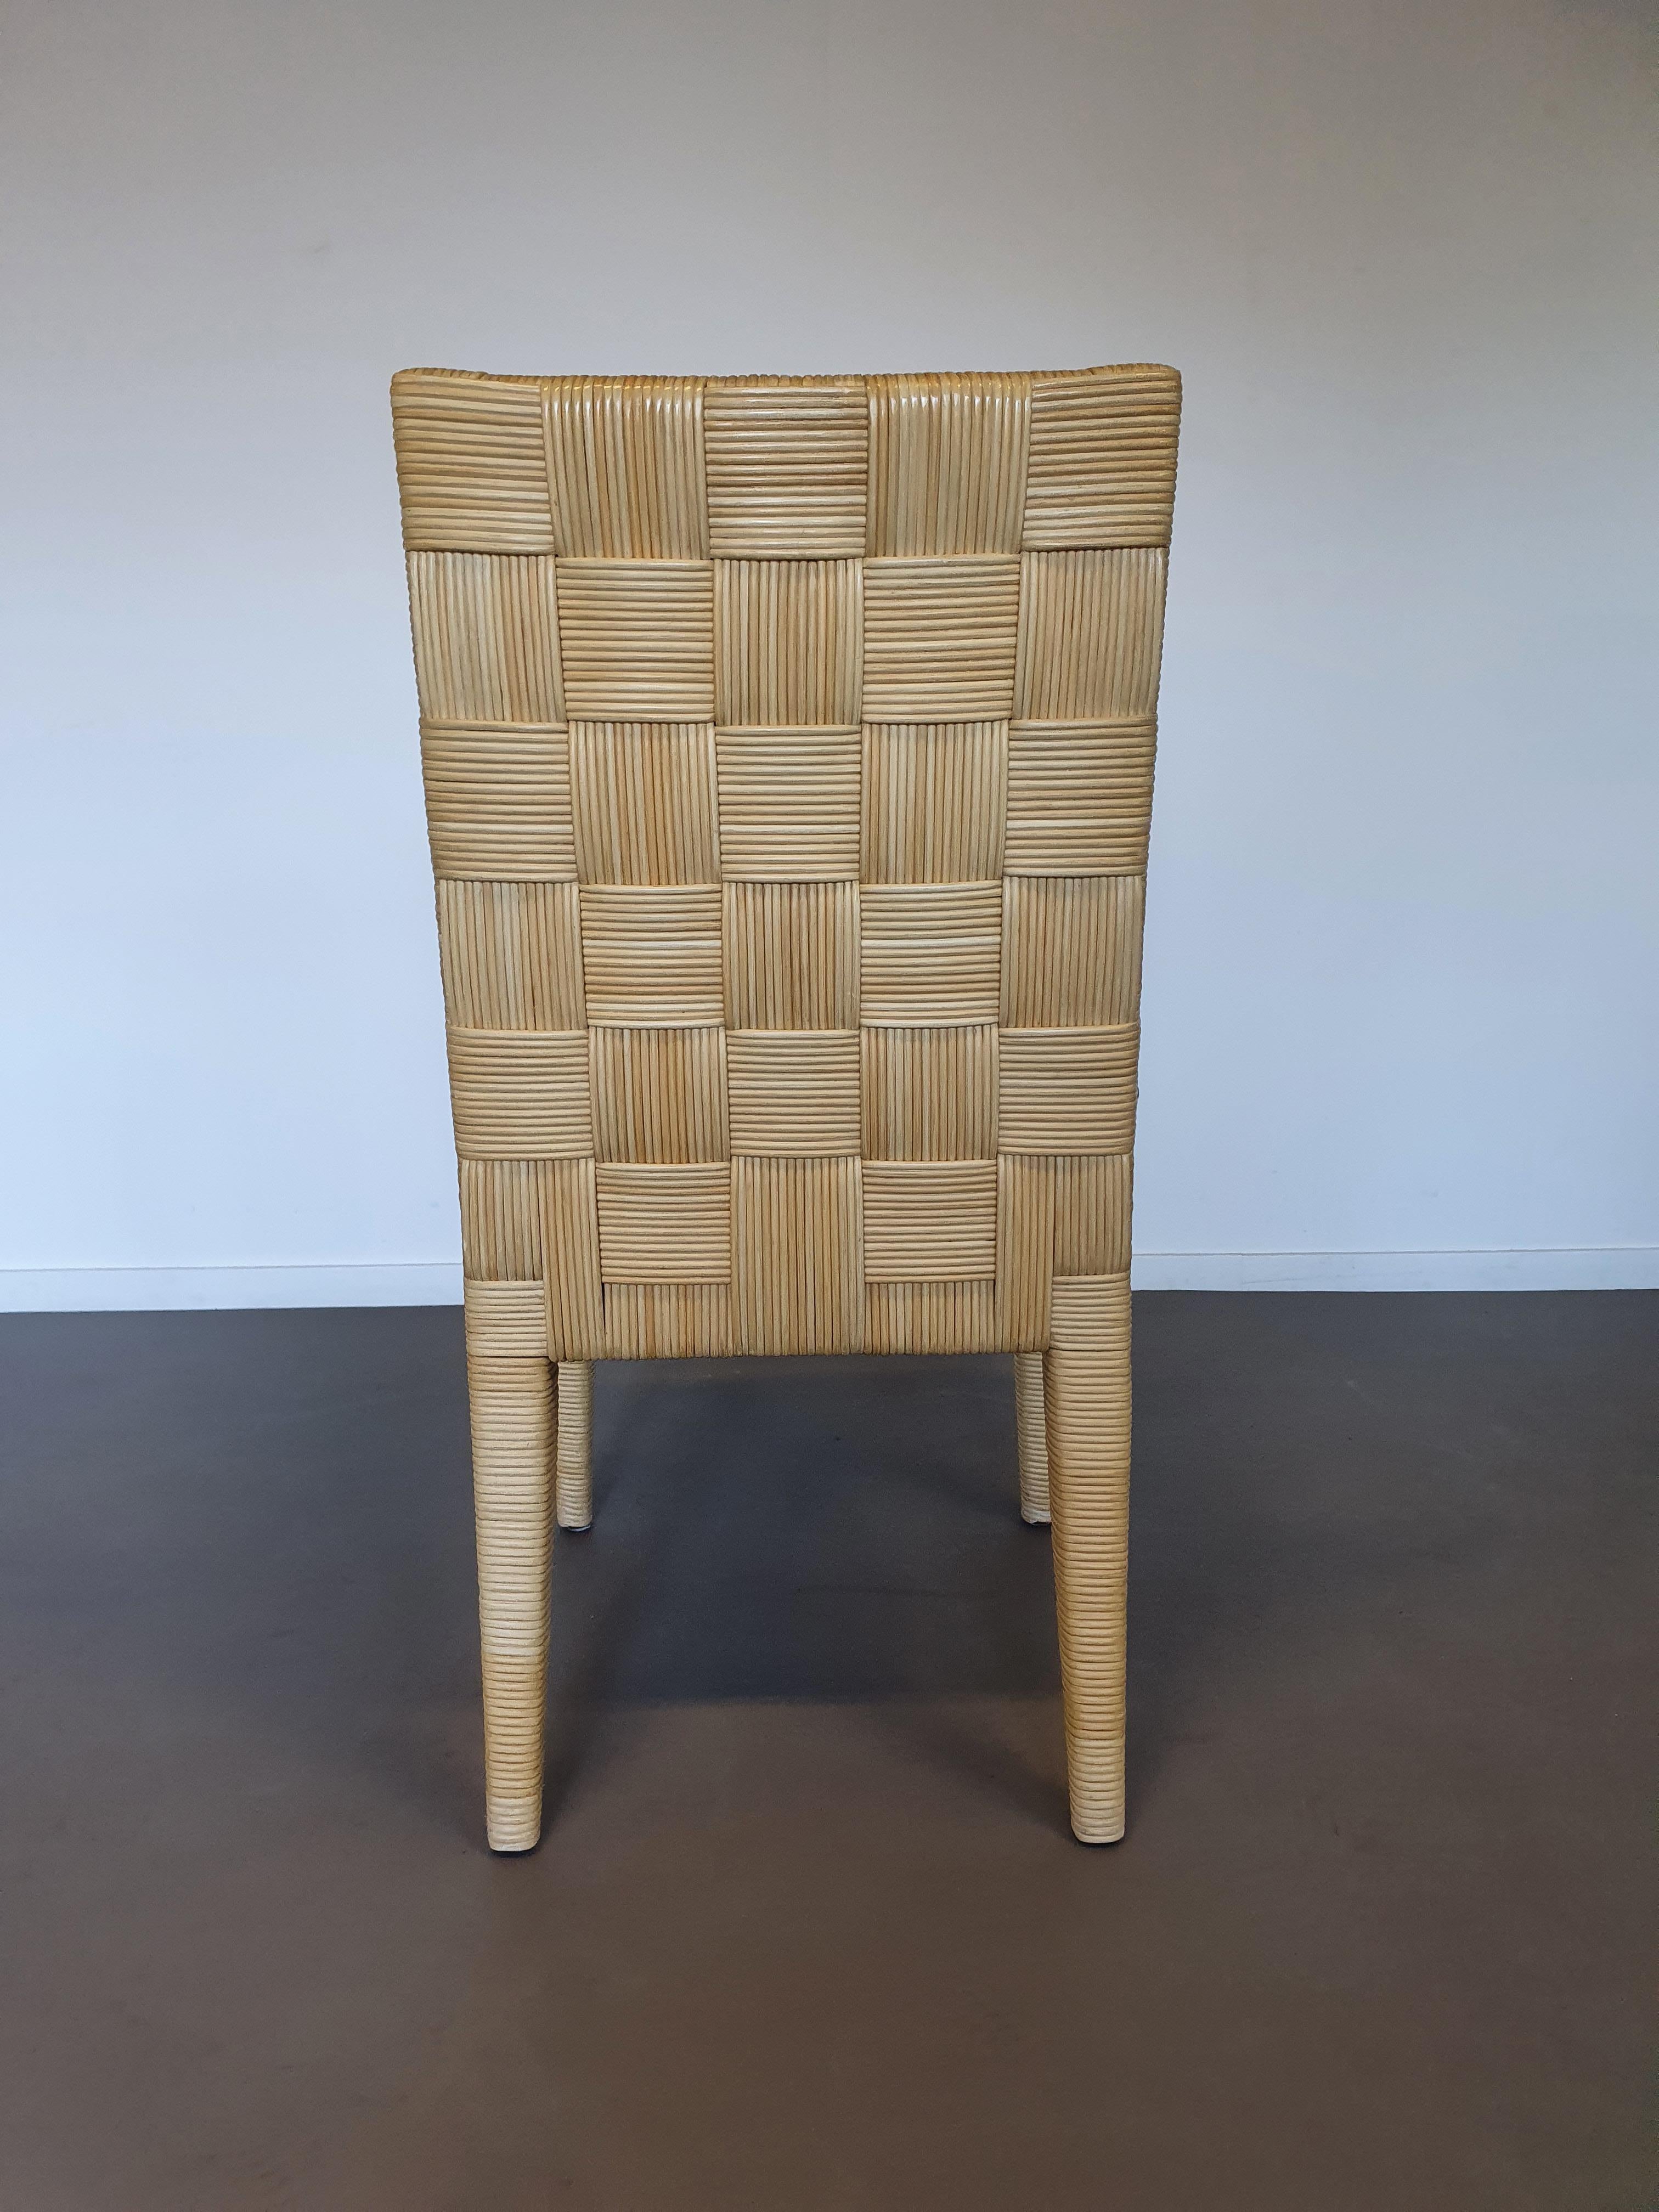 Donghia Block Island chairs 1990s with leather seats. 5 x armrests, 2 x without For Sale 11